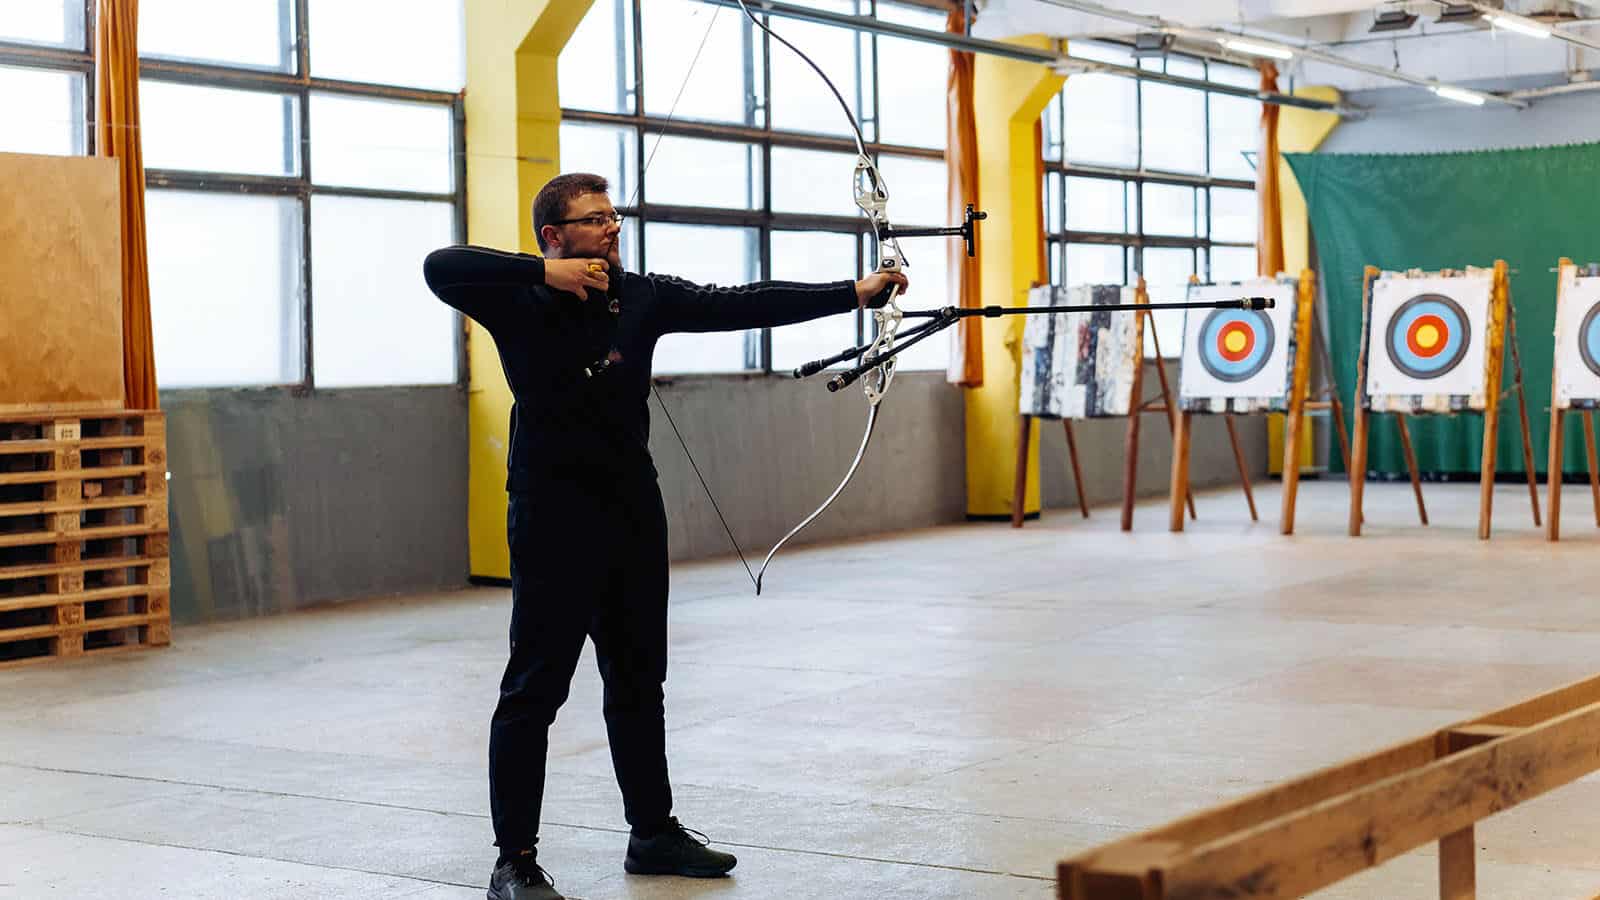 Is Archery ExpensiveCost Breakdown for Bow, Arrow & Equipment -Practice and Training Facilities